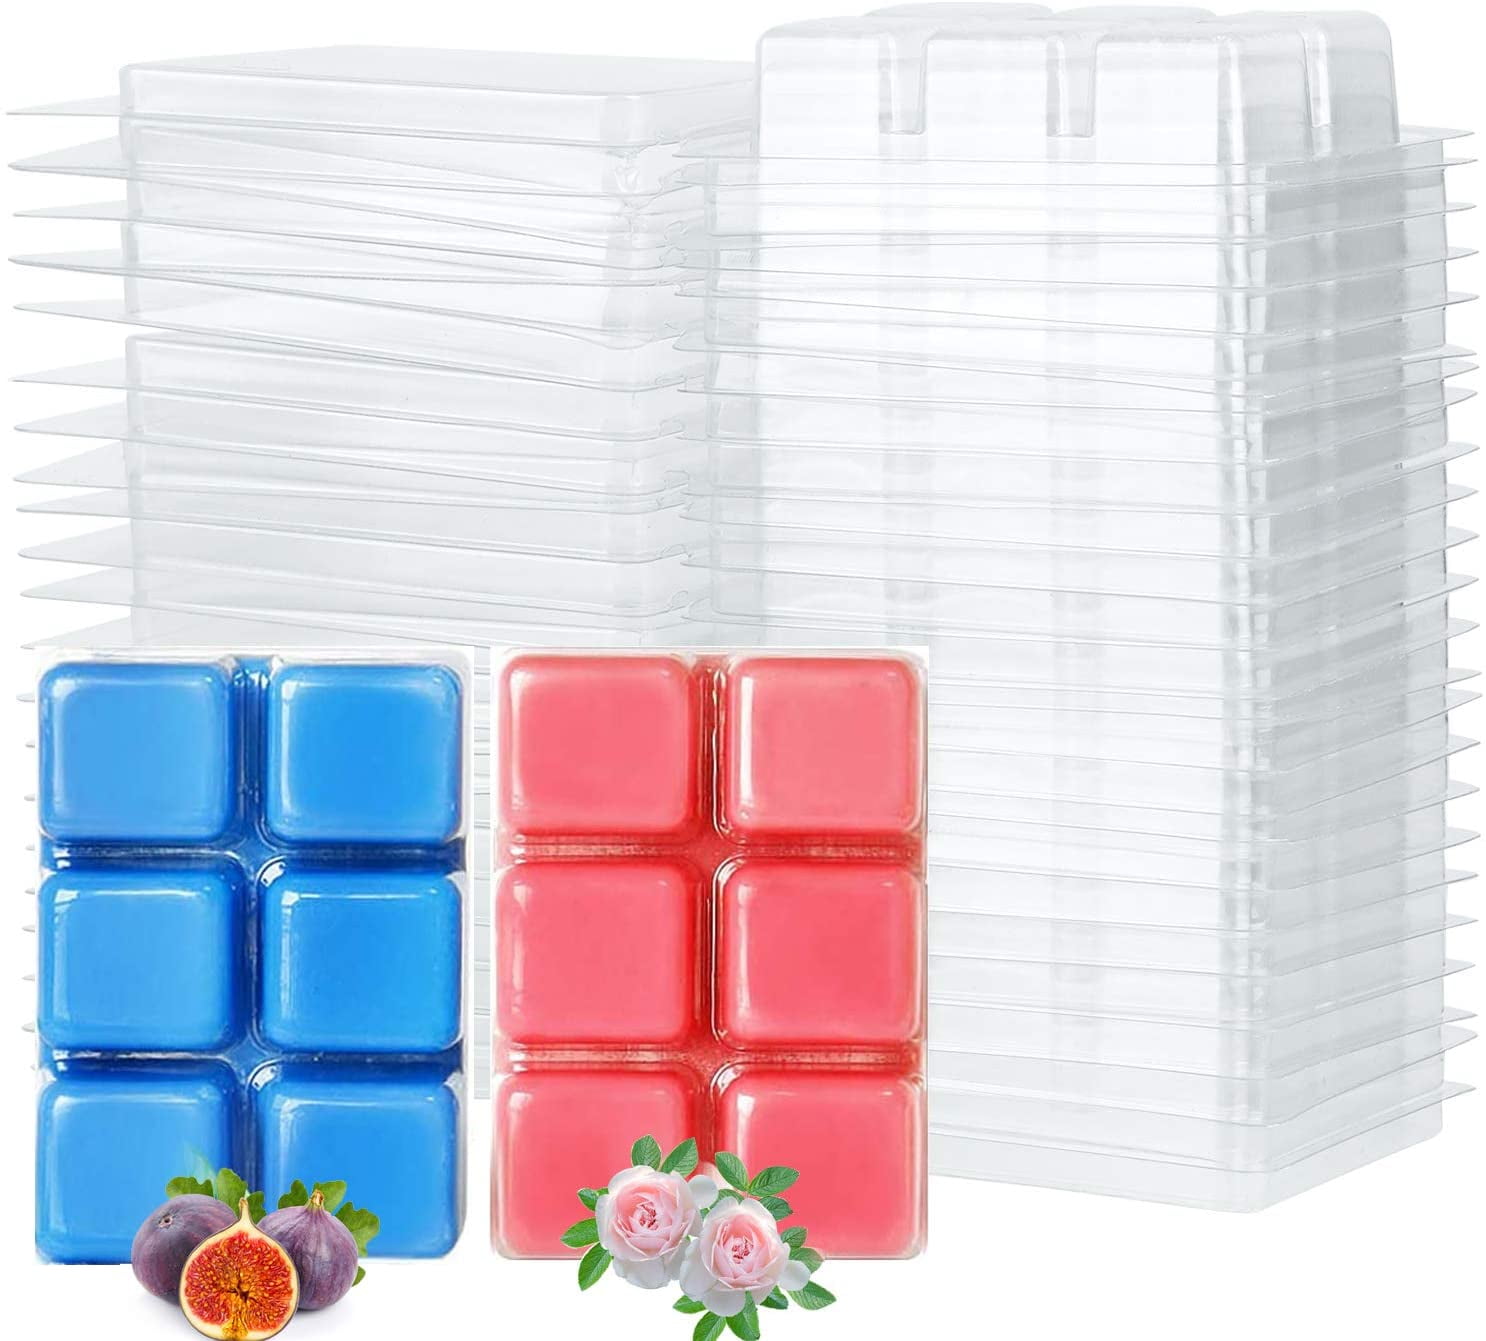 Soaps Finger bar 10-section 4-cavities Silicone Mould Wax Melts Candles Resin